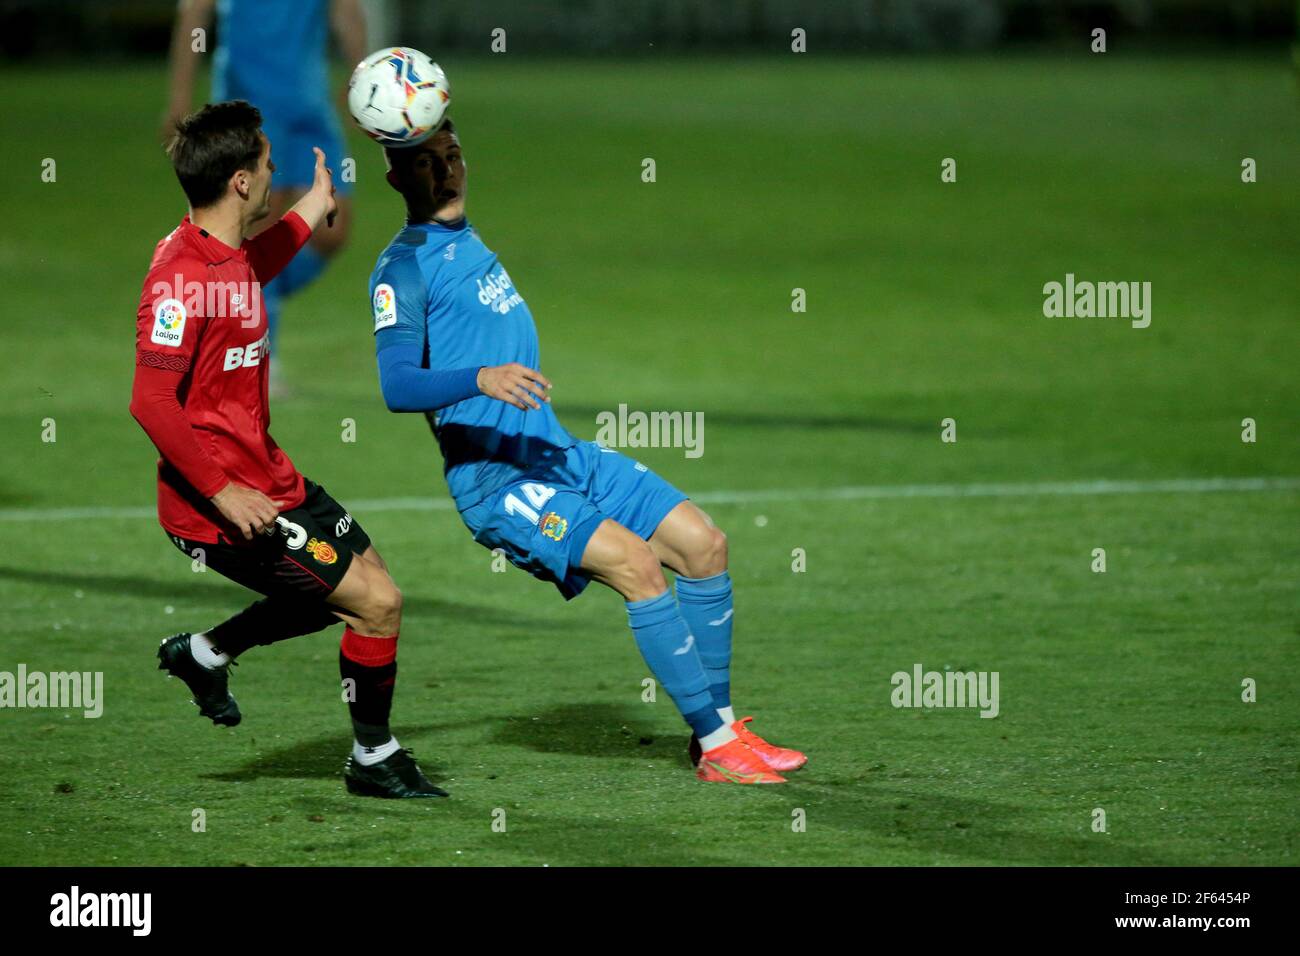 Fuenlabrada, Madrid, Spain, 29.03.2021C. F. Fuenlabrada against R. C. D. Mallorca match of the second division of Spanish soccer in match 31. Fuenlabrada player Oscar Pichi (R)an Mallorca player Brian Olivan (L) Final score 4-1 winner Fuenlabrada with goals from the players Oscar Pichi 13 y 38  Nteka 41  and Pathe Ciss 73  Mallorca scores his player Mboula 56  Photo: Juan Carlos Rojas/Picture Alliance | usage worldwide Stock Photo